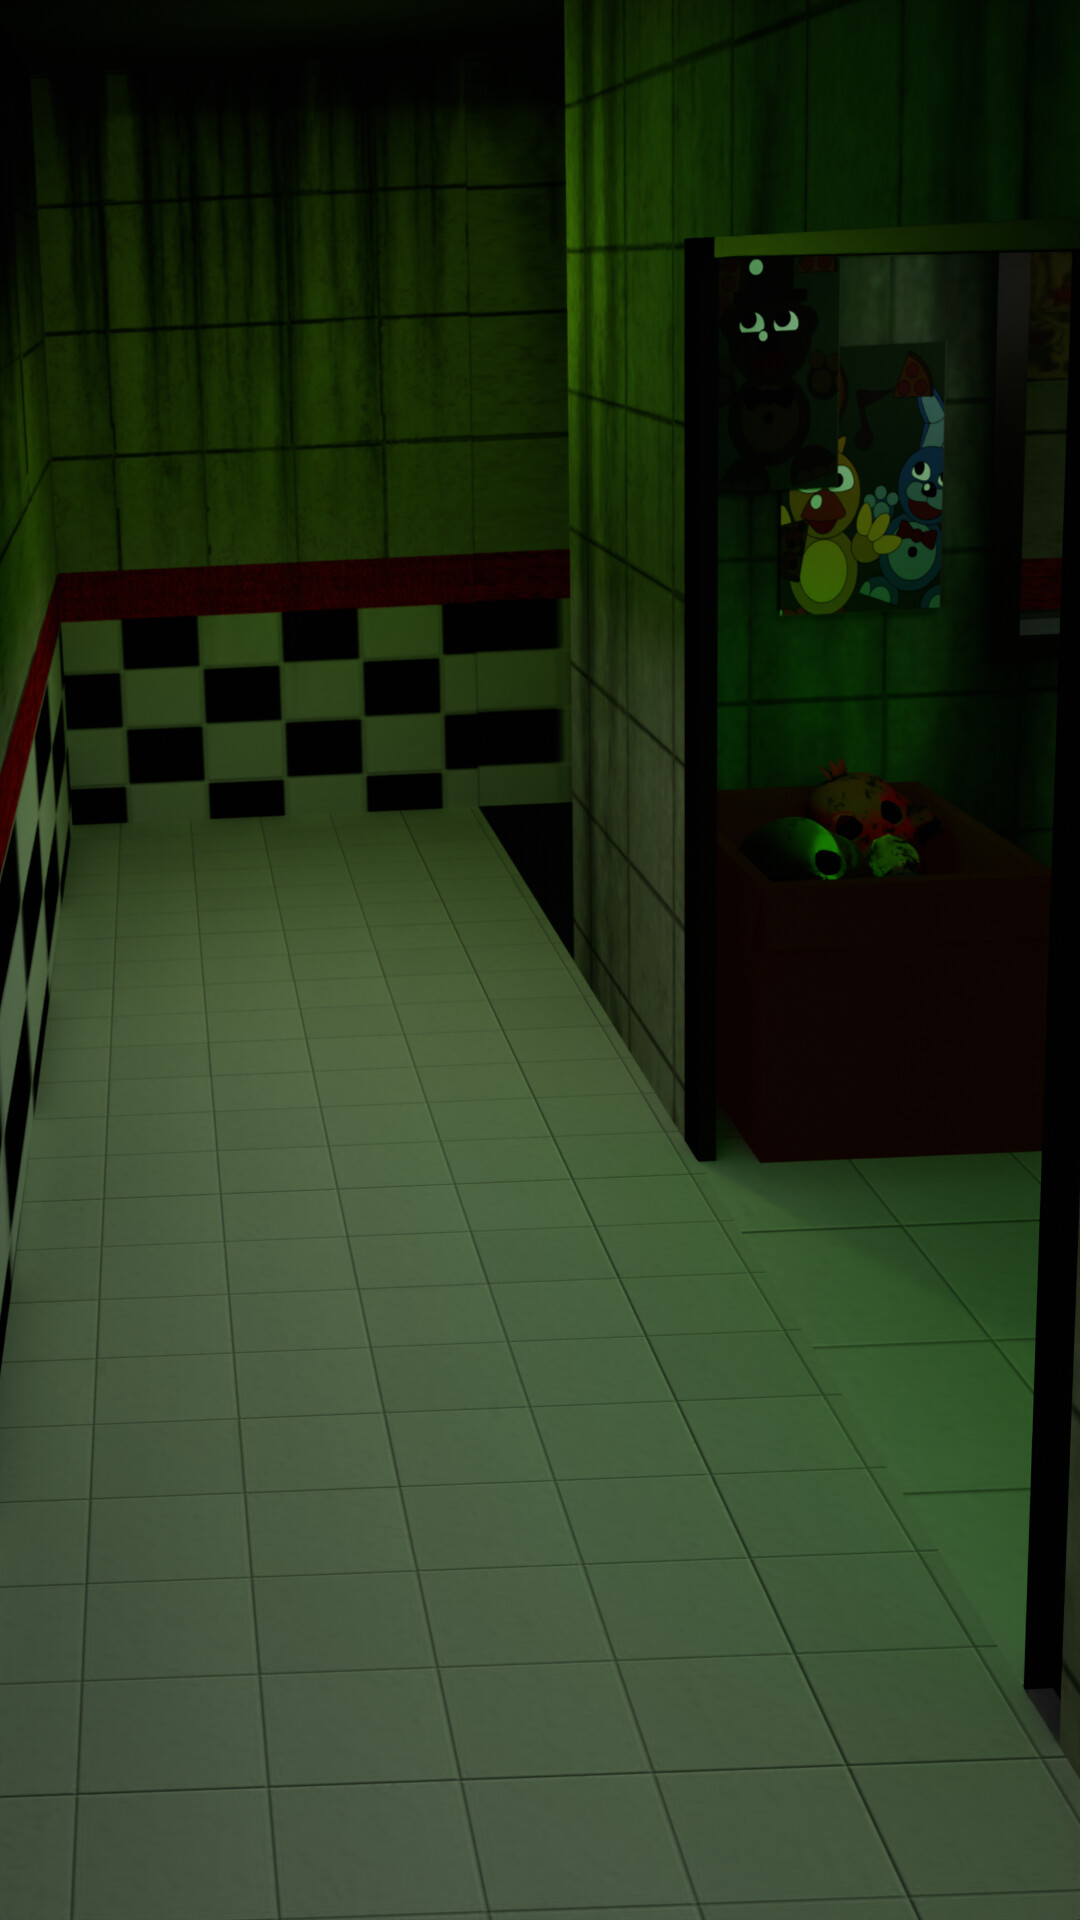 Five Nights At Freddy's 3 Map 